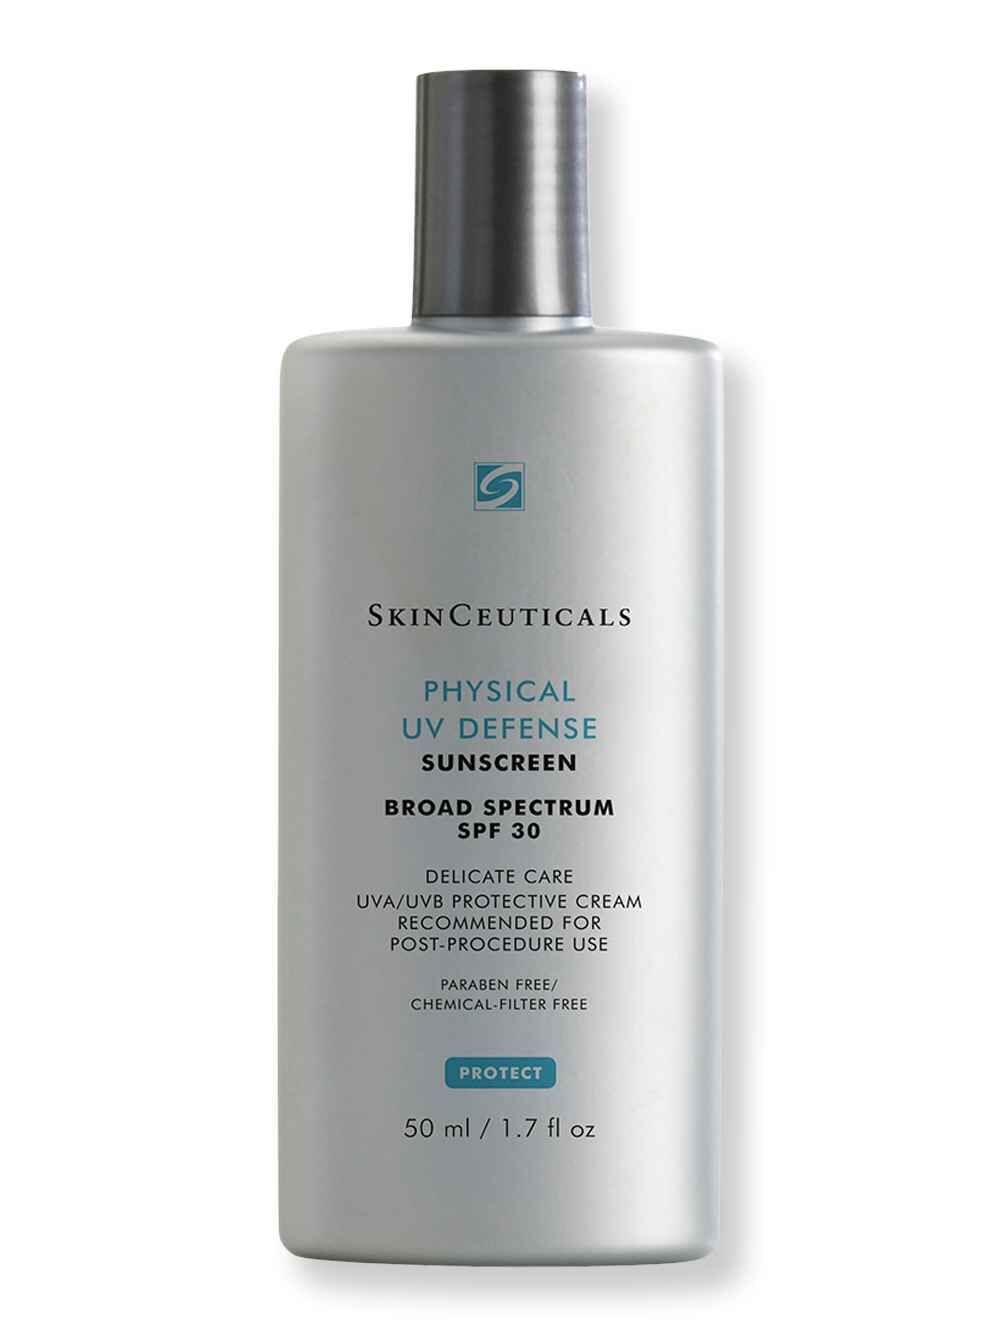 SkinCeuticals SkinCeuticals Physical UV Defense SPF 30 50 ml Face Sunscreens 